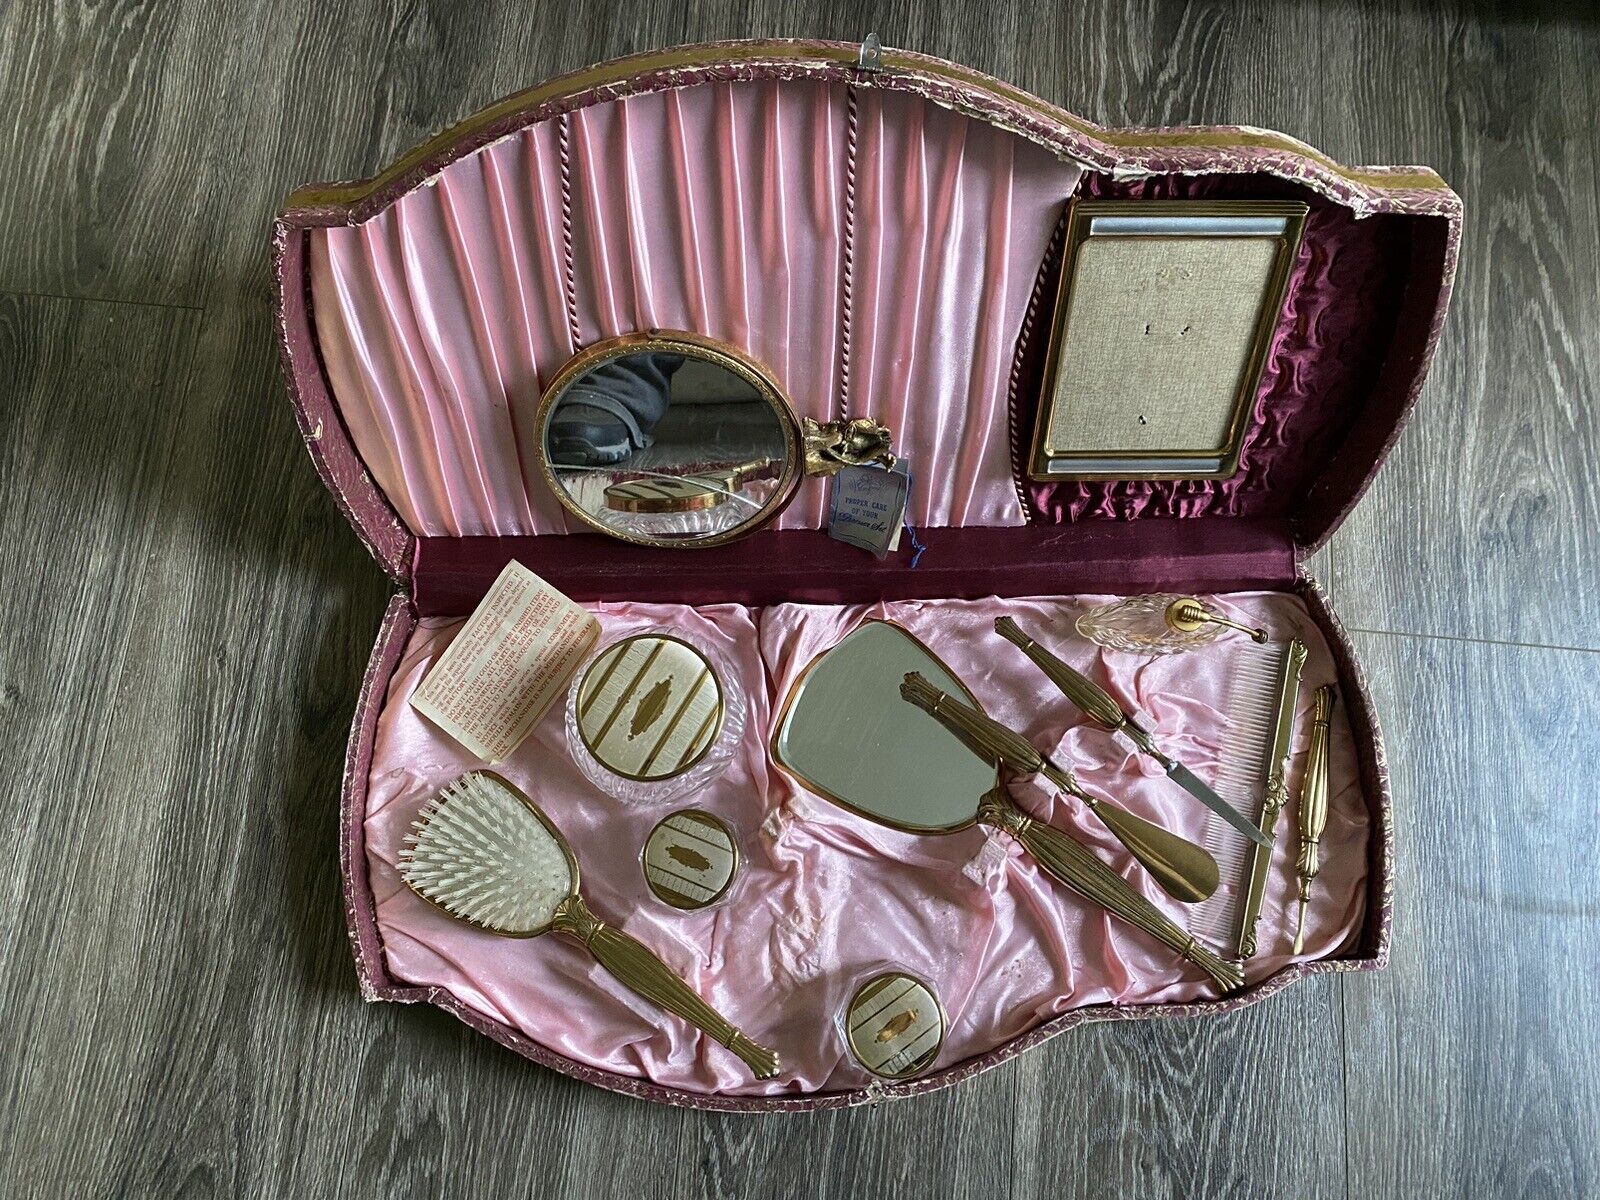 VTG 11 Piece Rosalind Russell Vanity Set With Original Case And Extra Mirror